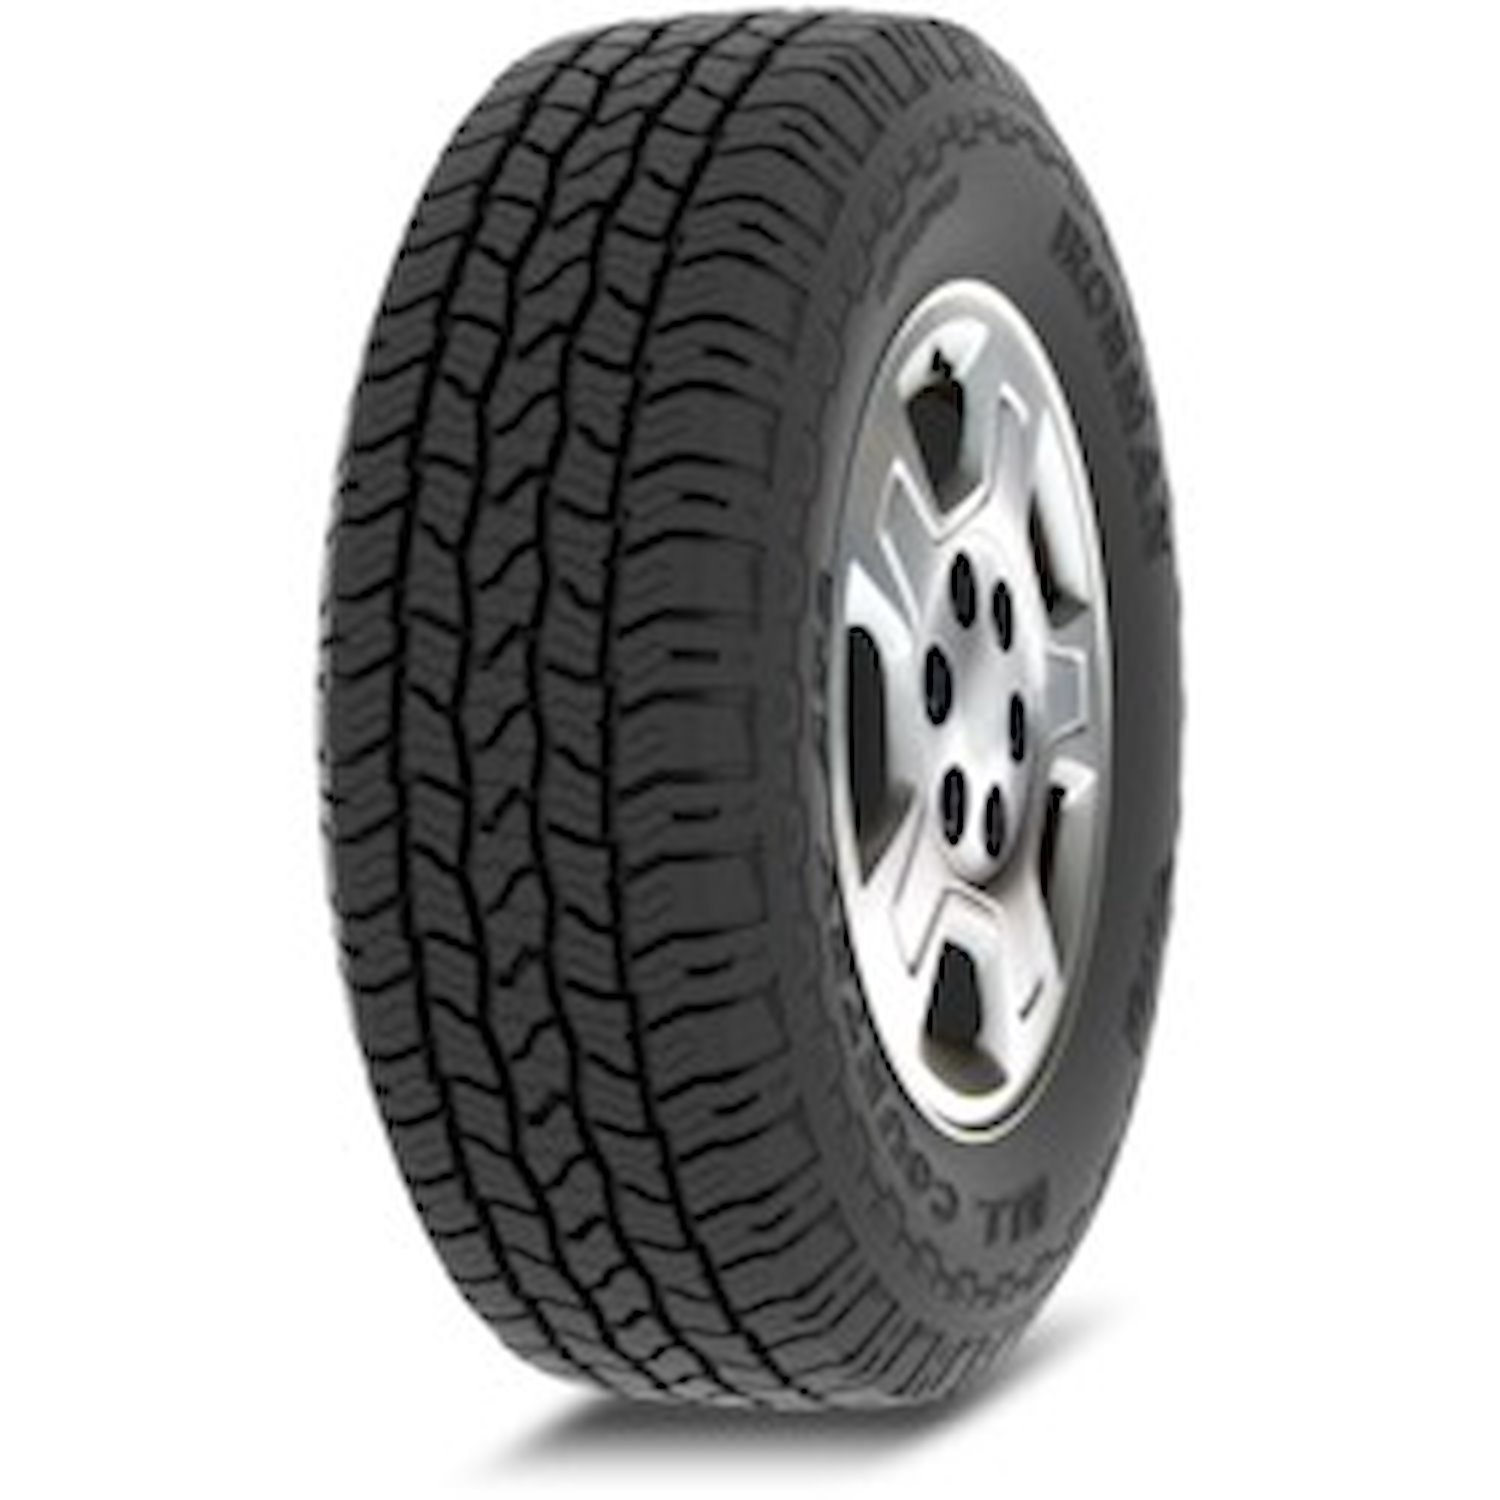 07690 All Country AT2 Tire, LT265/65R18, 122/119R